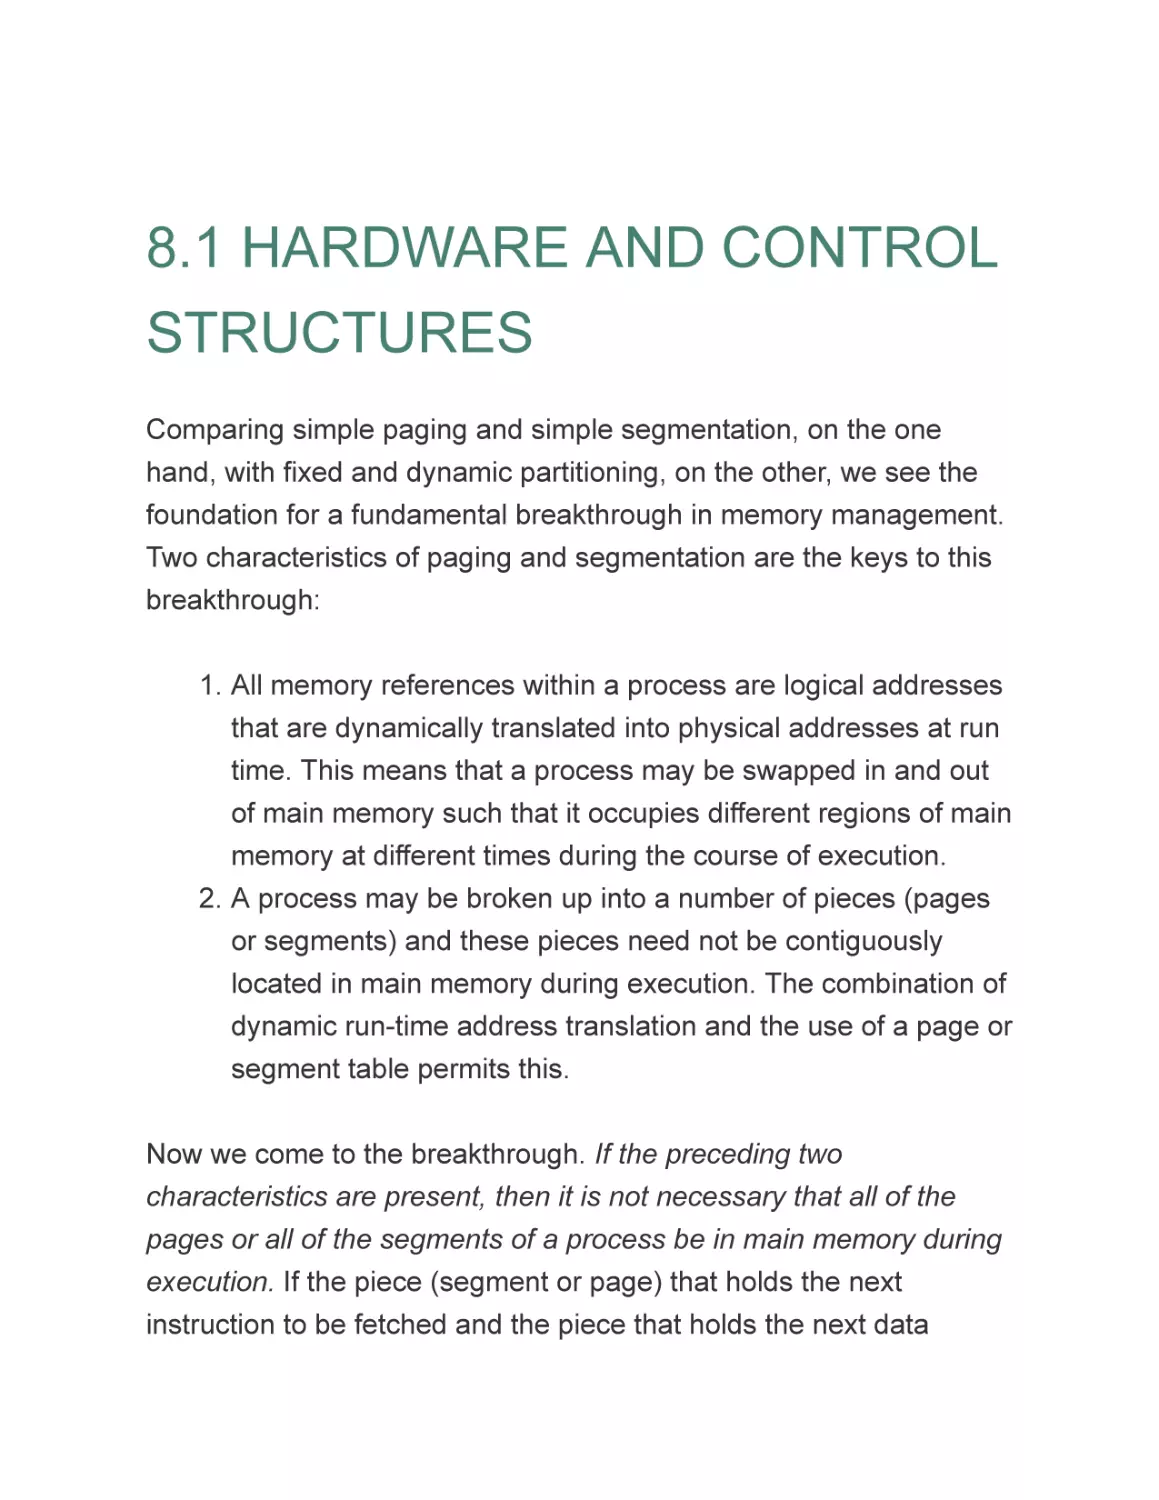 8.1 HARDWARE AND CONTROL STRUCTURES